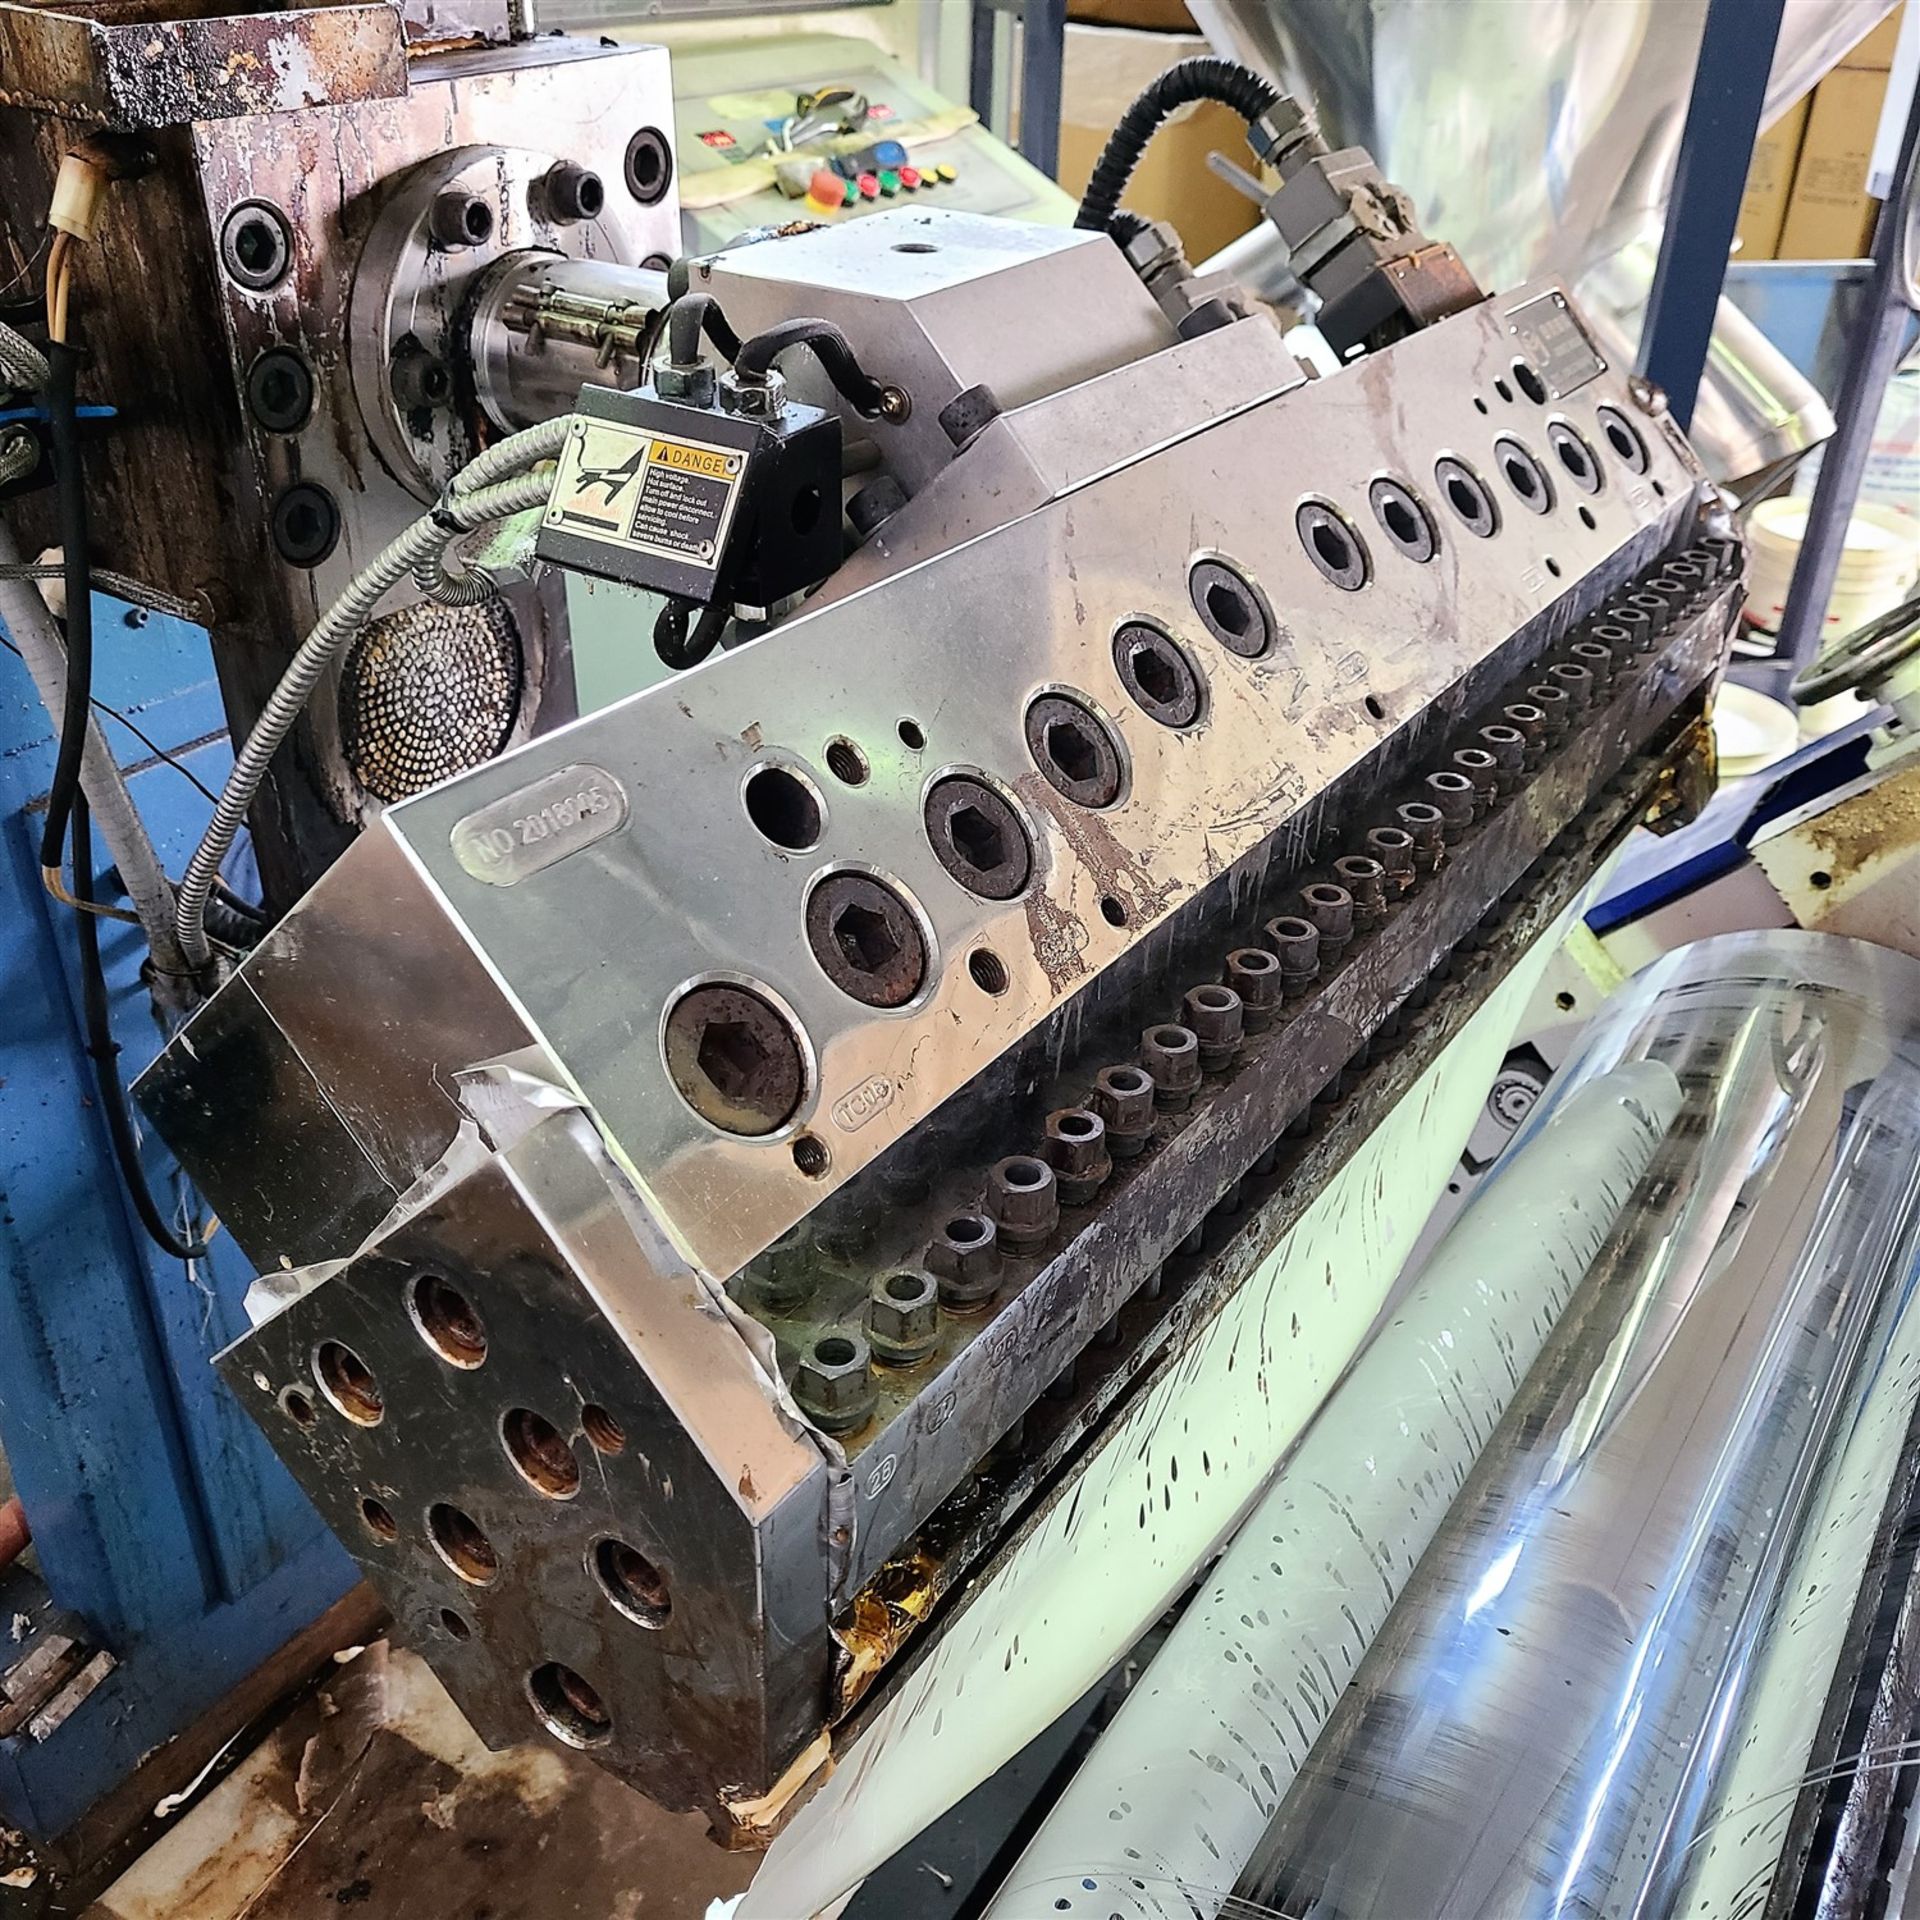 2007 EXTRUDER W/4 IN. BARREL, 380V/3 PH, 980 RPM, 45 KW, 36 IN. MAX WIDTH SHEET SIZE DIE, CONTROL - Image 3 of 11